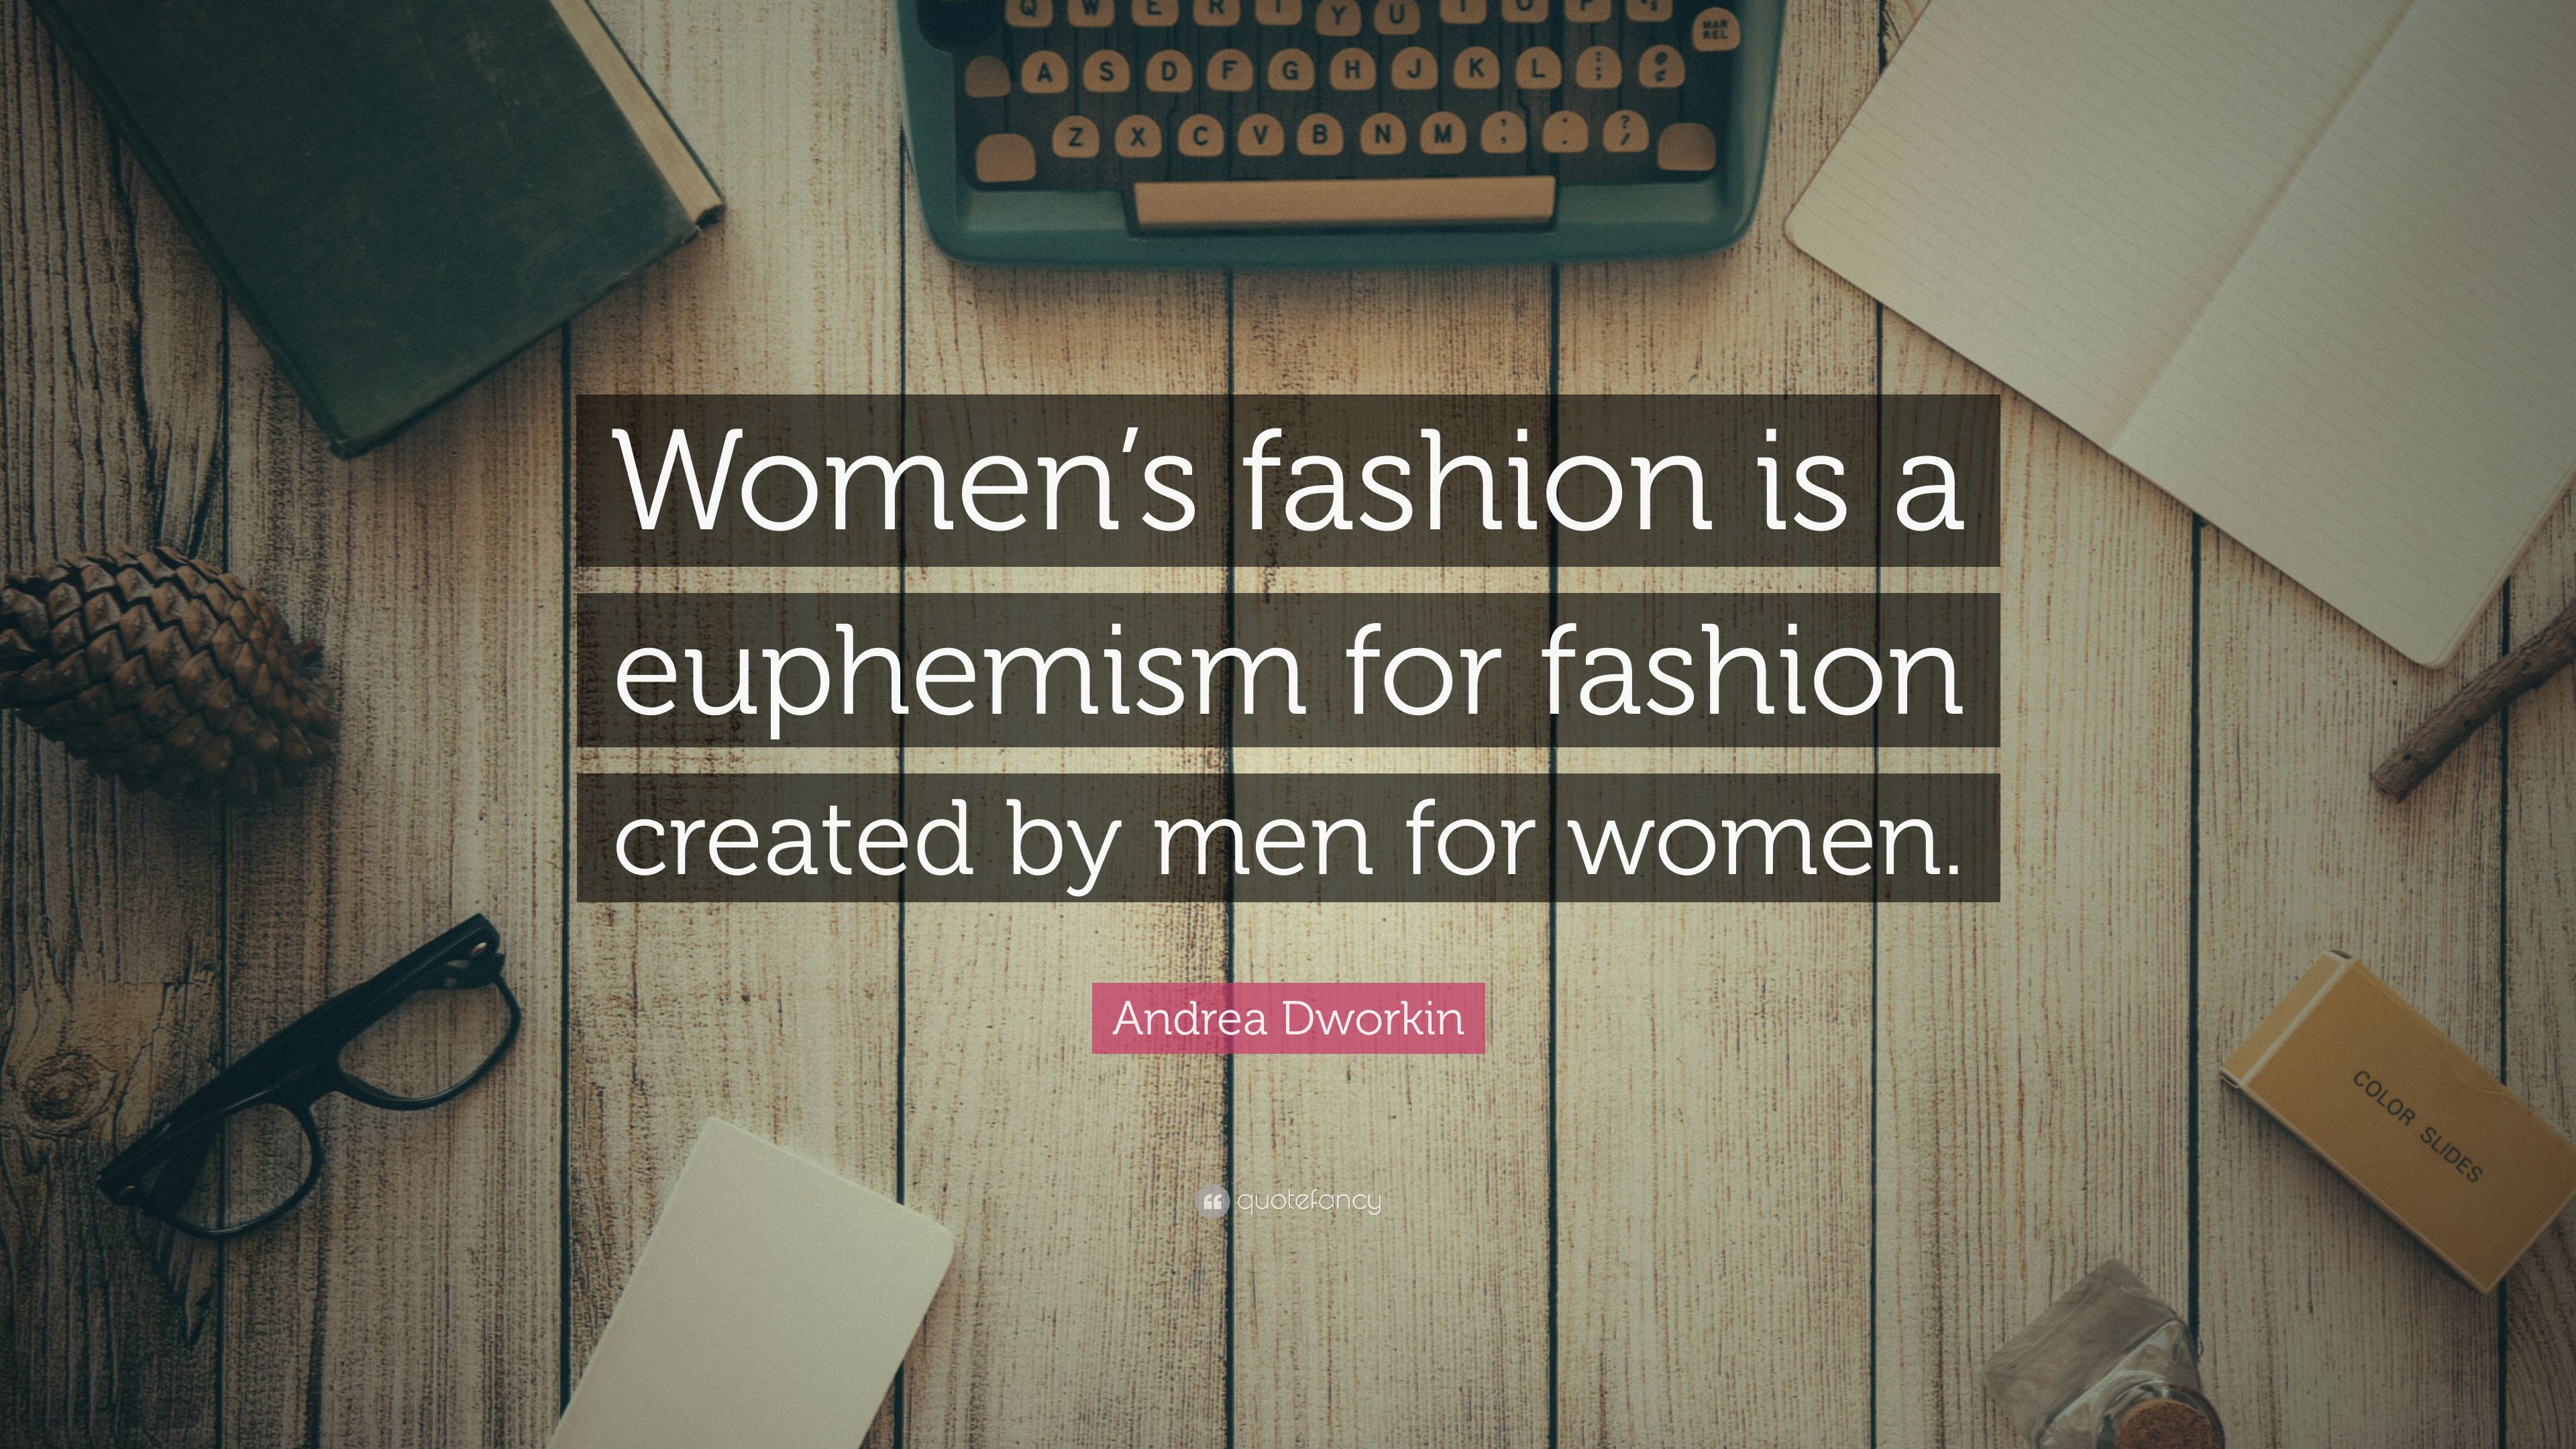 Andrea Dworkin Quote: "Women's fashion is a euphemism for fashion...